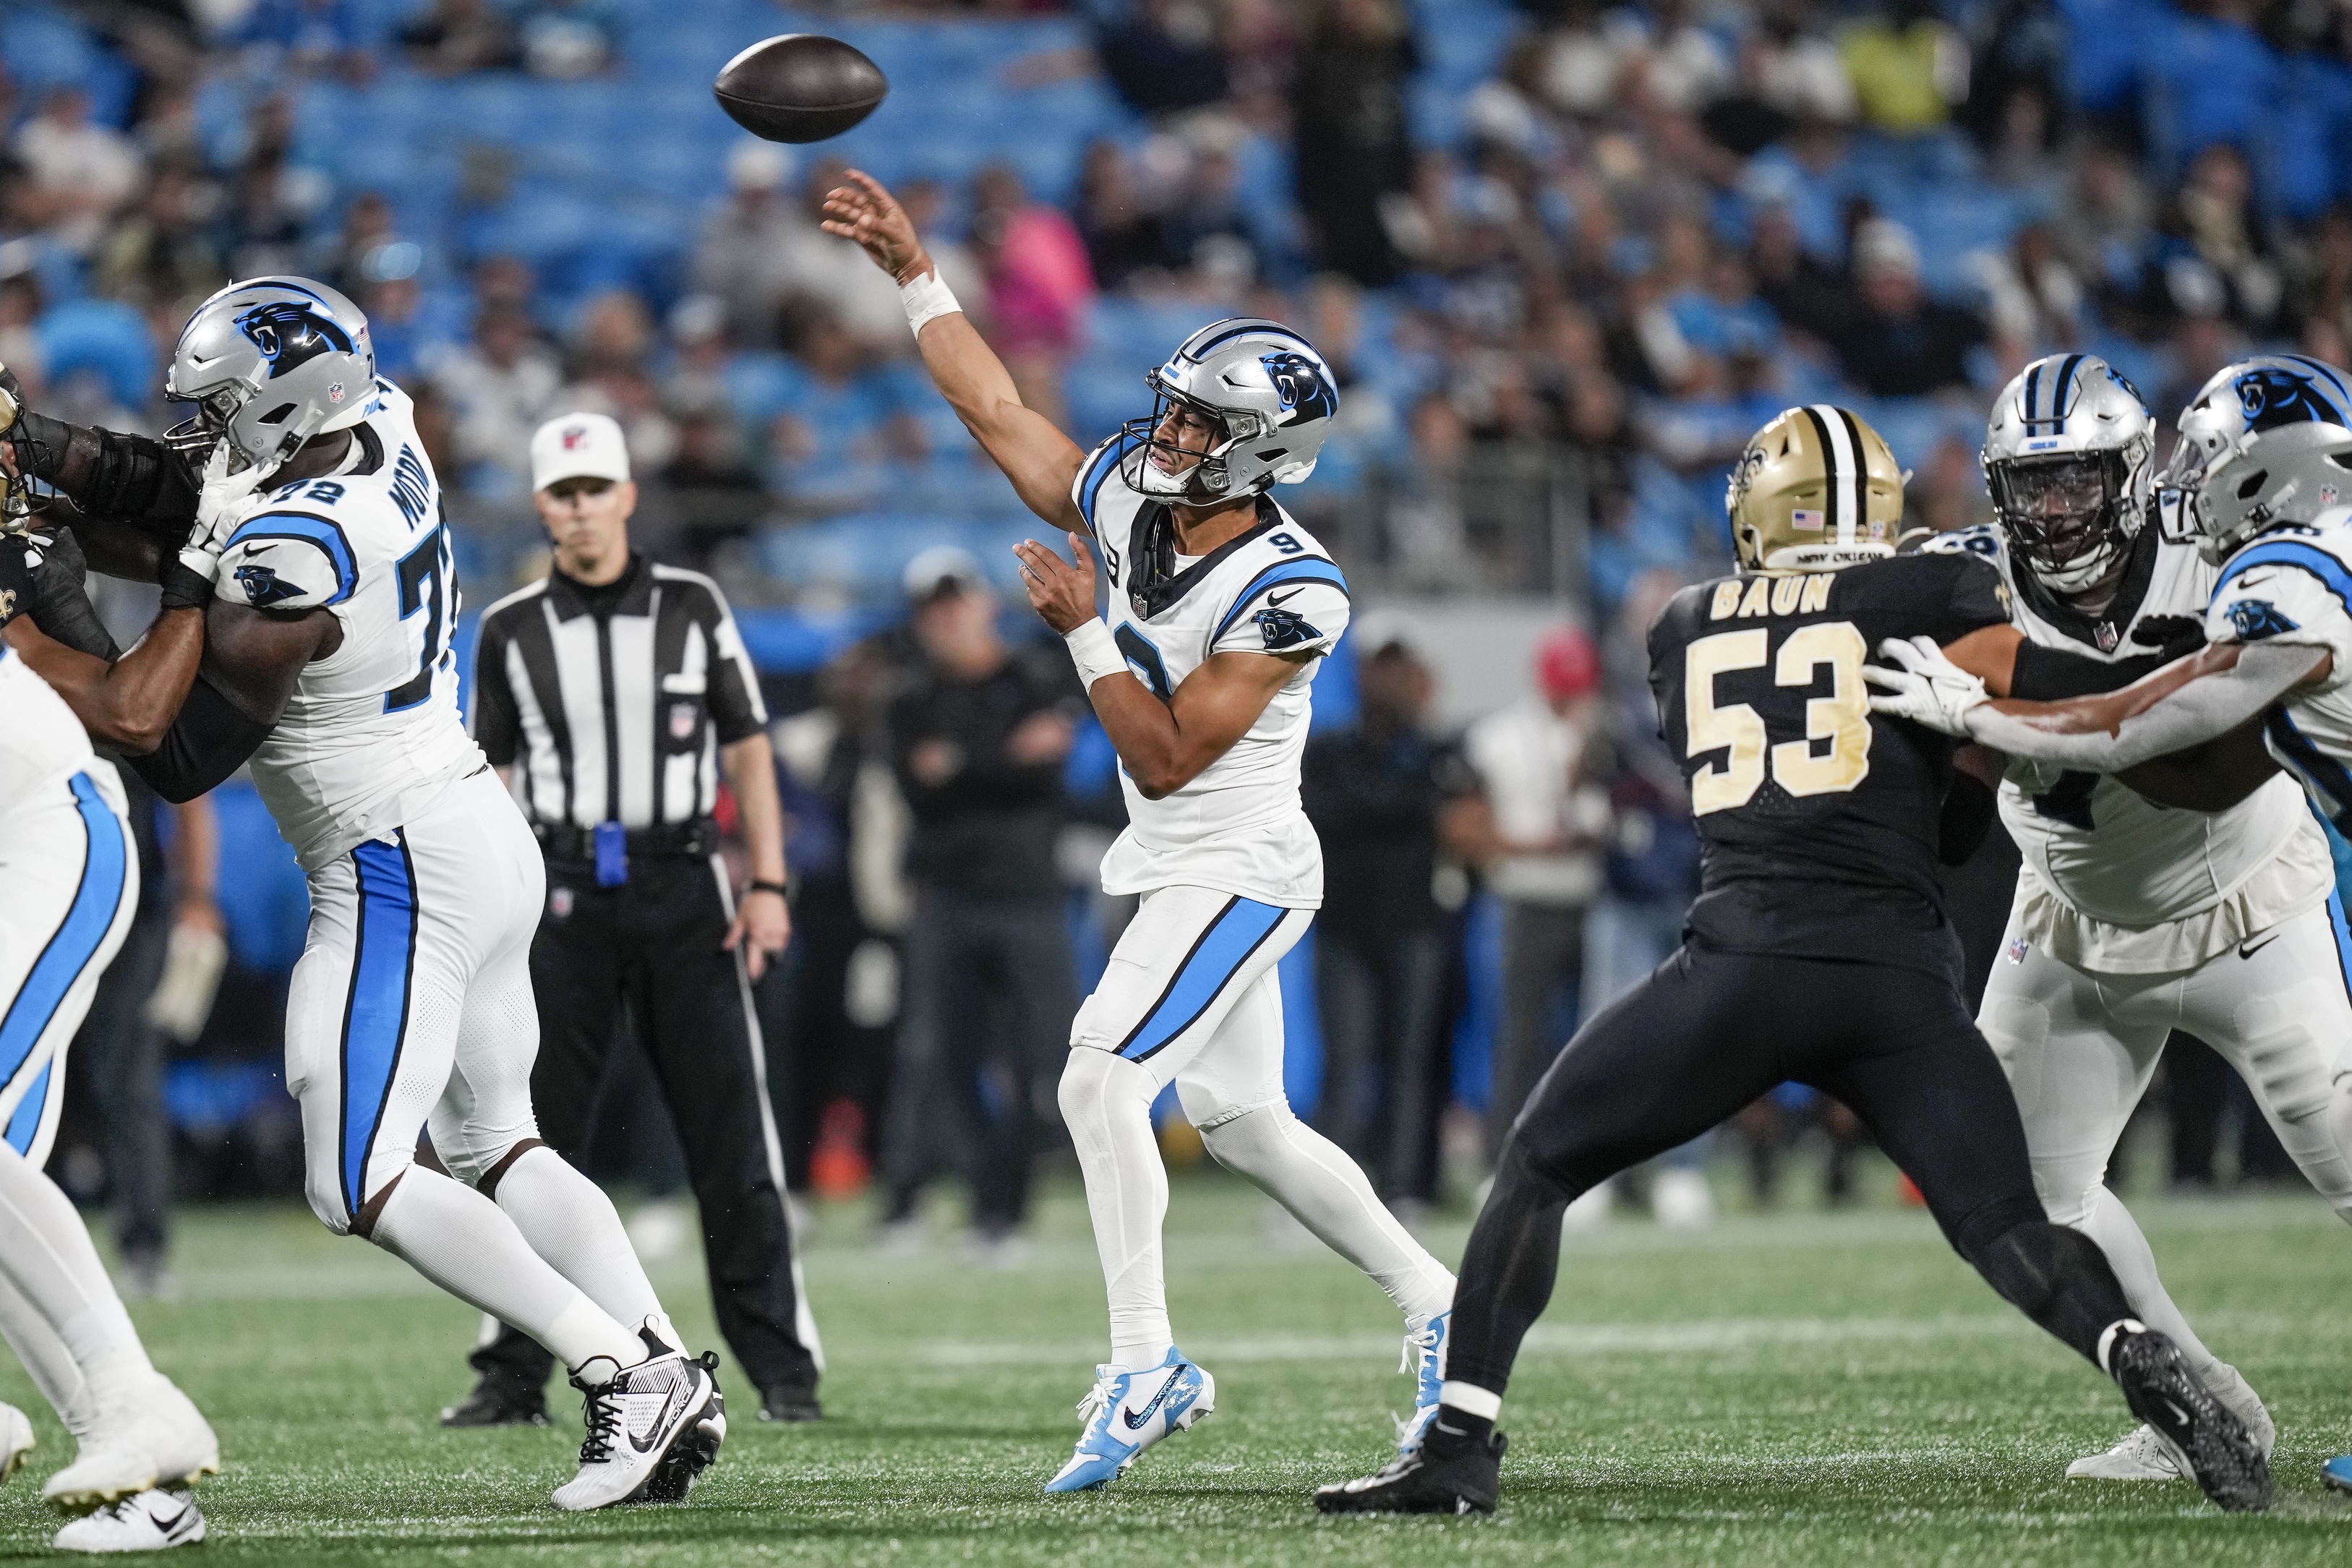 Carolina Panthers quarterback Bryce Young (9) throws against the New Orleans Saints. Mandatory Credit: Jim Dedmon-USA TODAY Sports